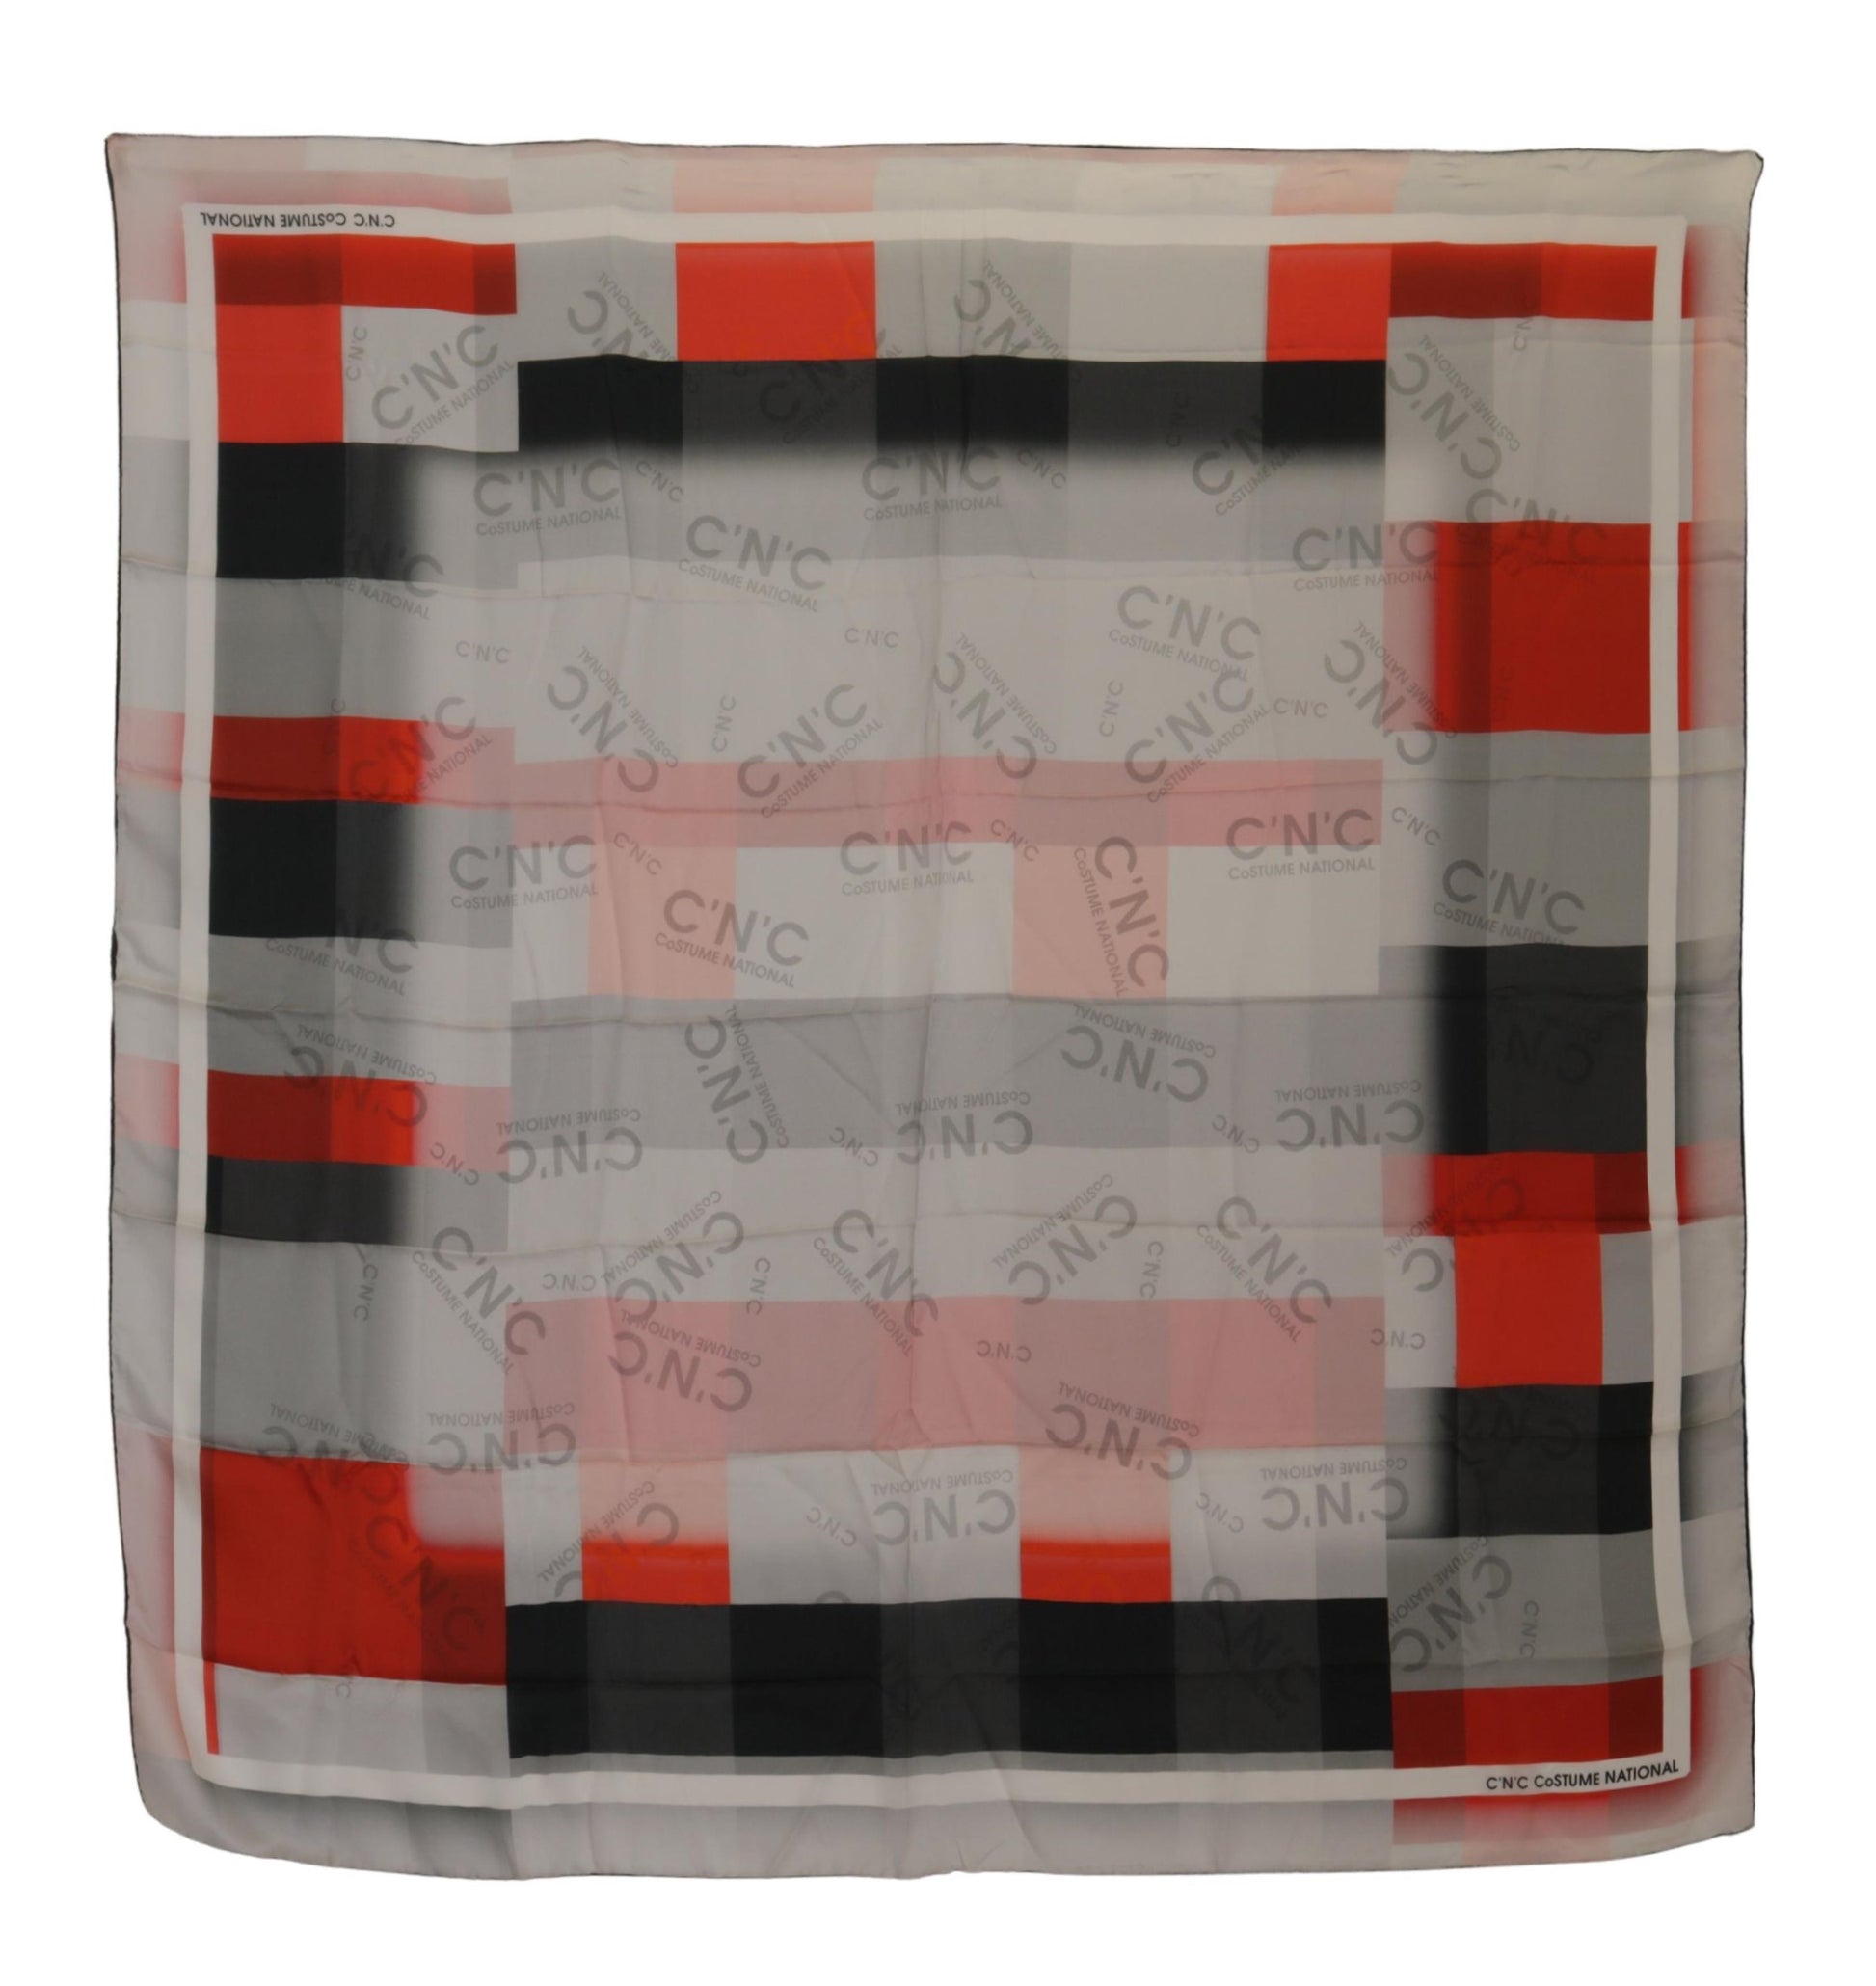 Costume National Gray Red Shawl Foulard Wrap Scarf - Designed by Costume National Available to Buy at a Discounted Price on Moon Behind The Hill Online Designer Discount Store